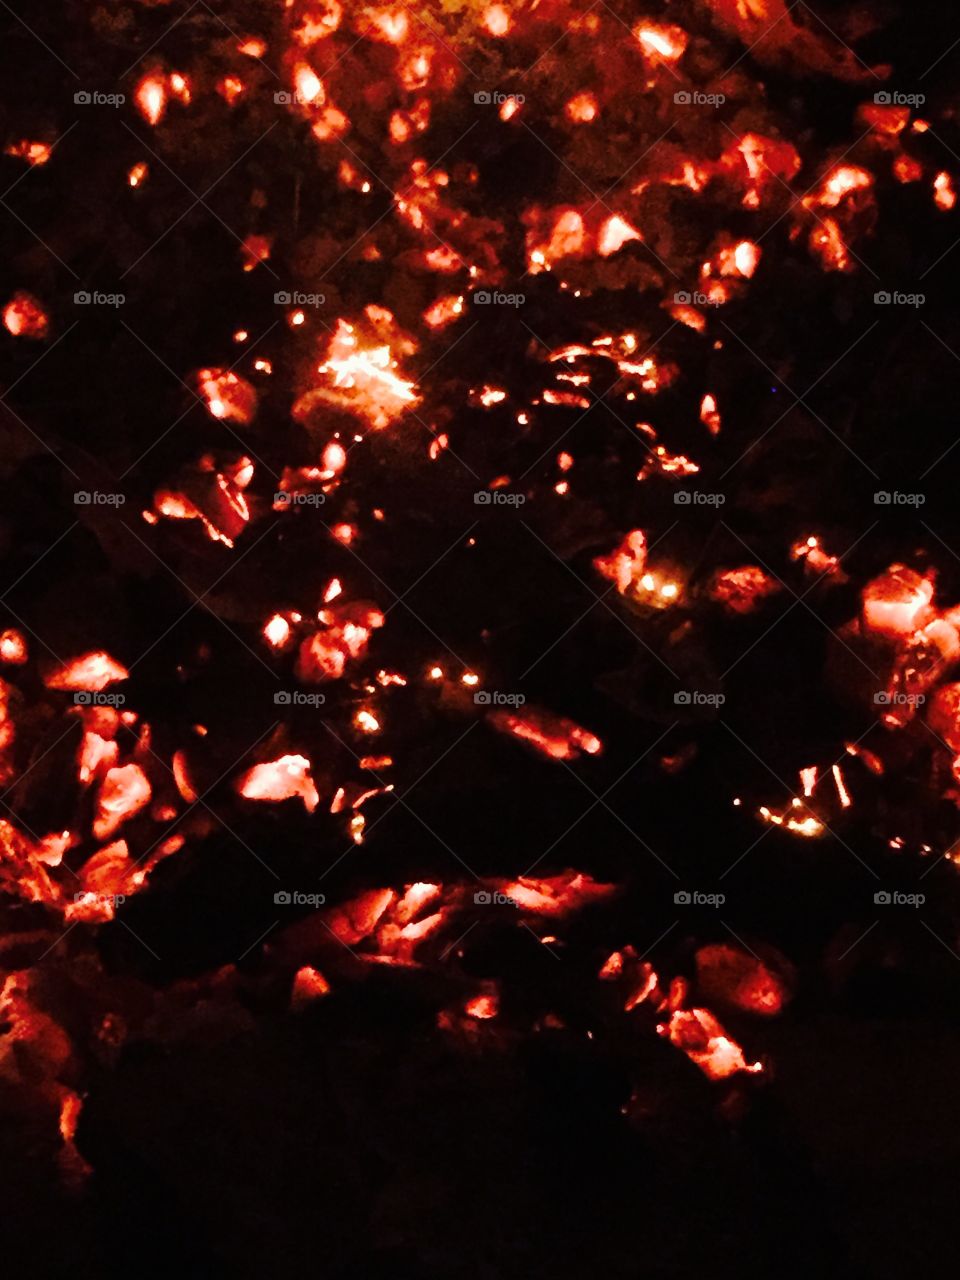 Red hot embers 